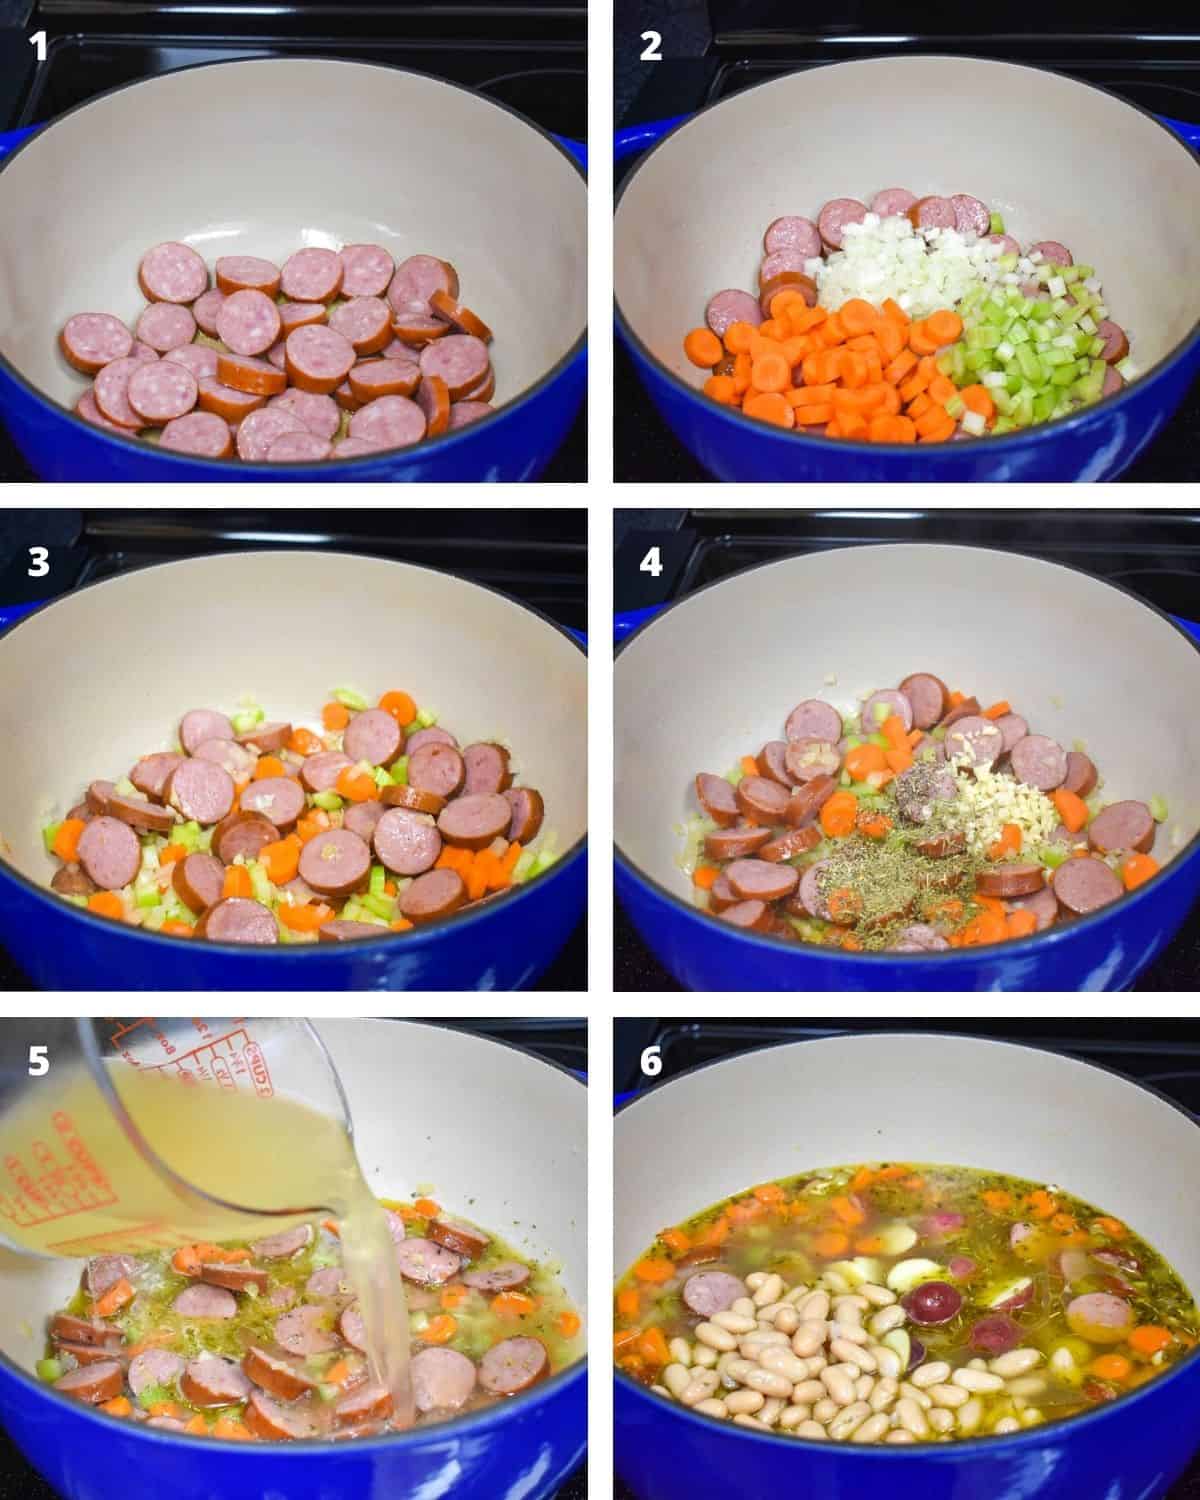 Six images showing the steps of making the soup in a large, blue pot with an off-white inside.